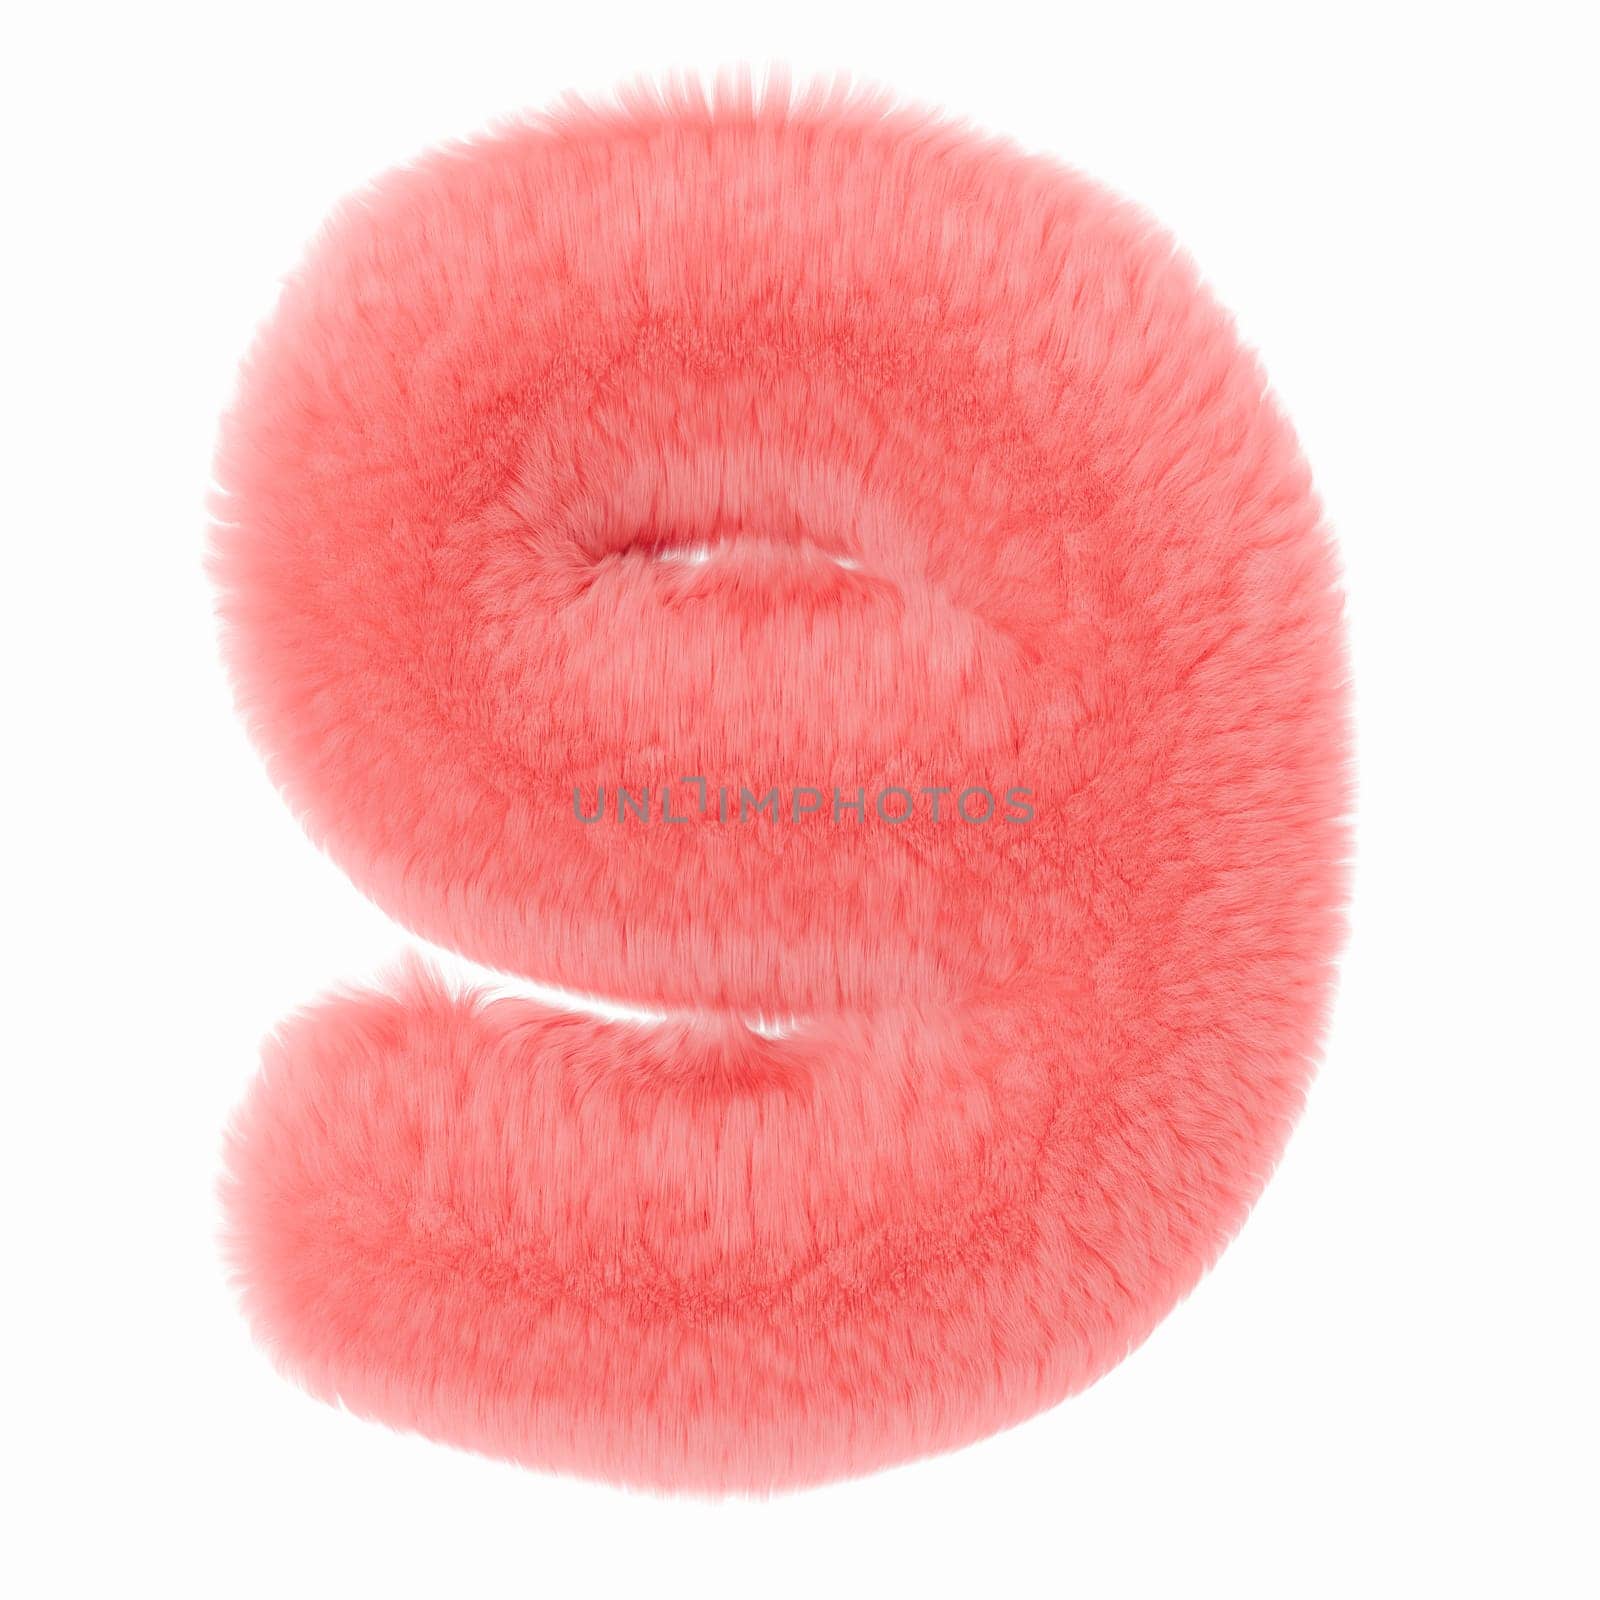 Pink and fluffy 3D number nine, isolated on white background. Furry, soft and hairy symbol 9. Trendy, cute design element. Cut out object. 3D rendering. by creativebird